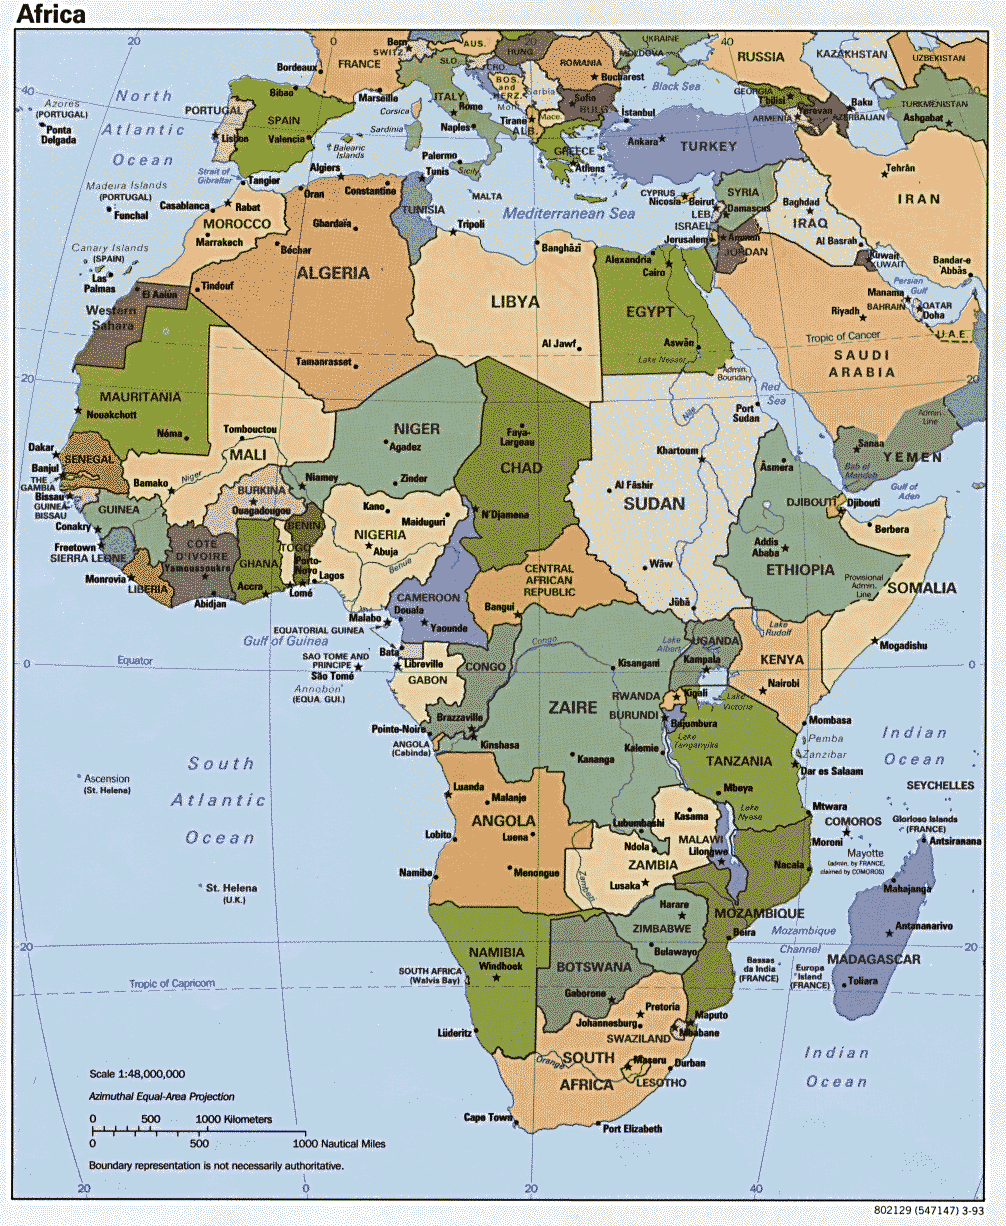 Africa Maps - Perry-Castañeda Map Collection - UT Library Online